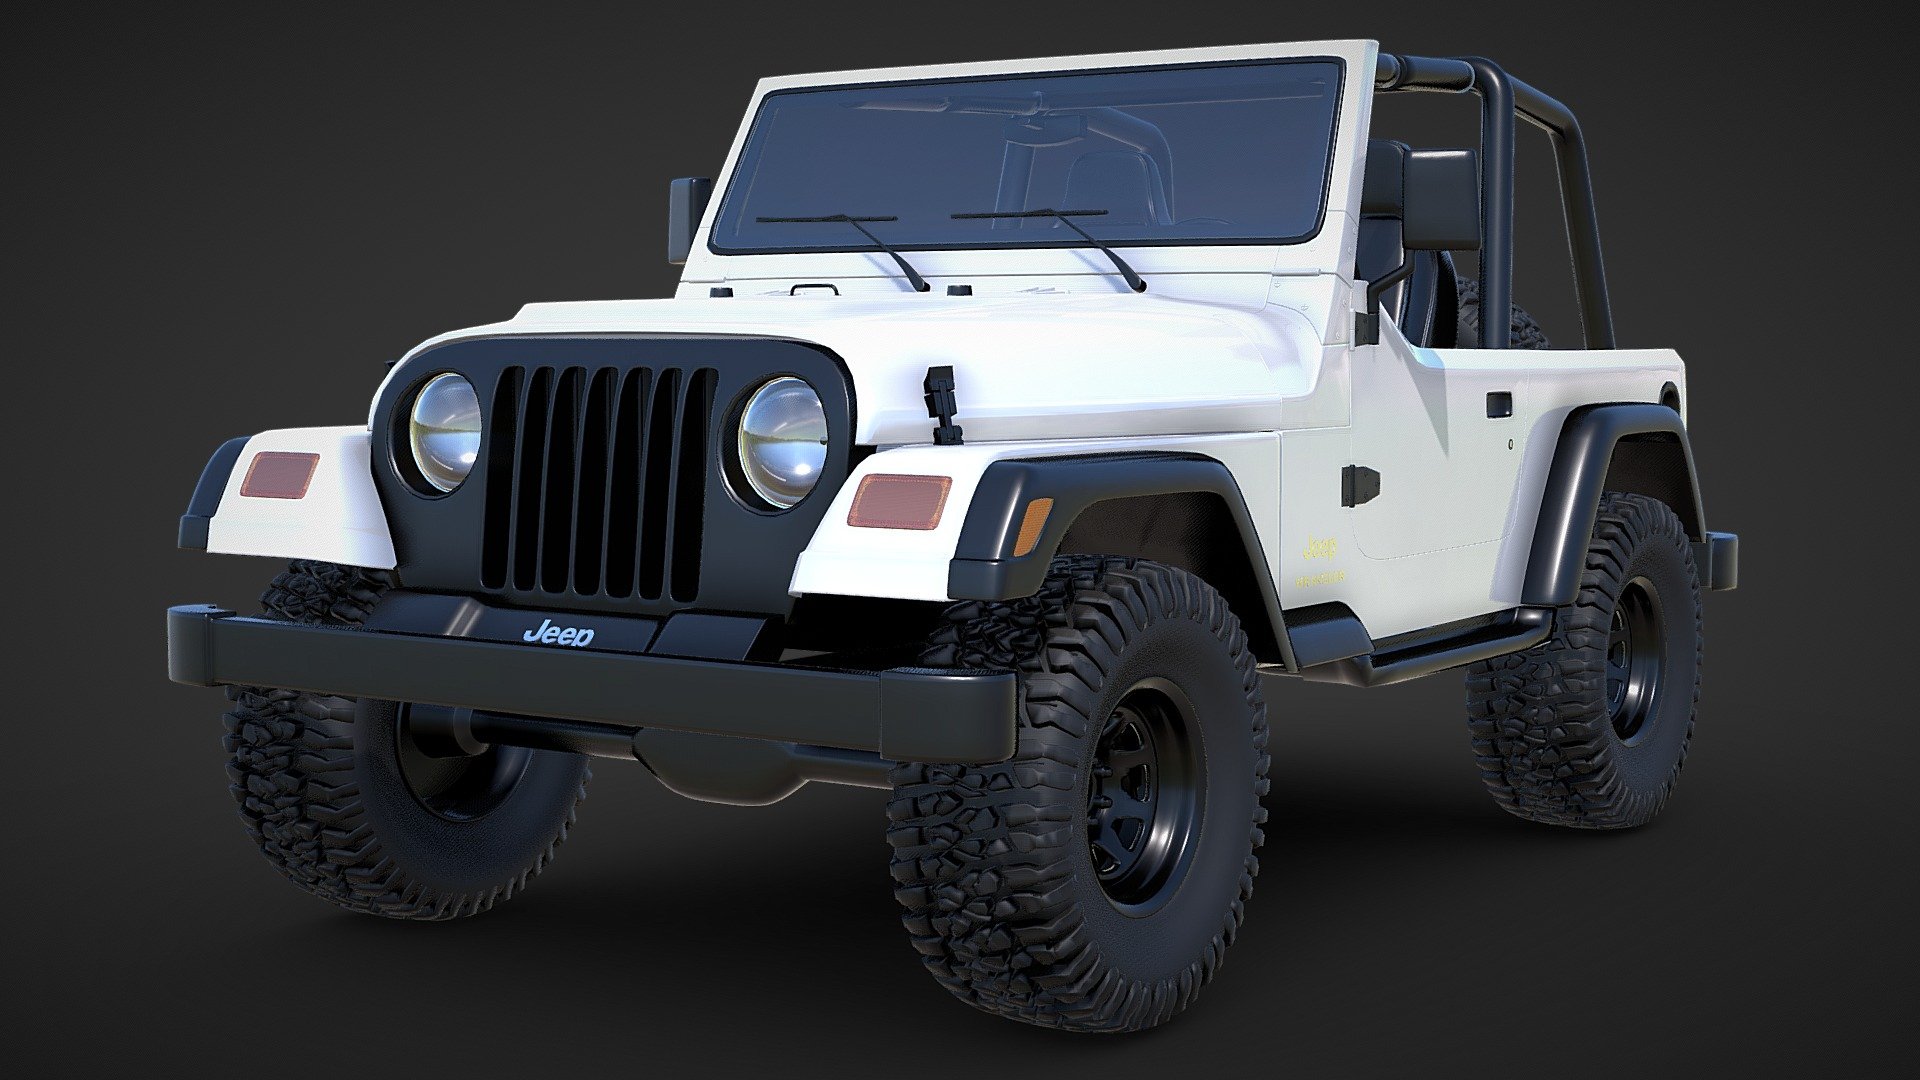 Jeep Wrangler 1997 Stock Variation - Jeep Wrangler 1997 Stock - Buy Royalty Free 3D model by Pitstop 3D (@Pitsop3D) 3d model